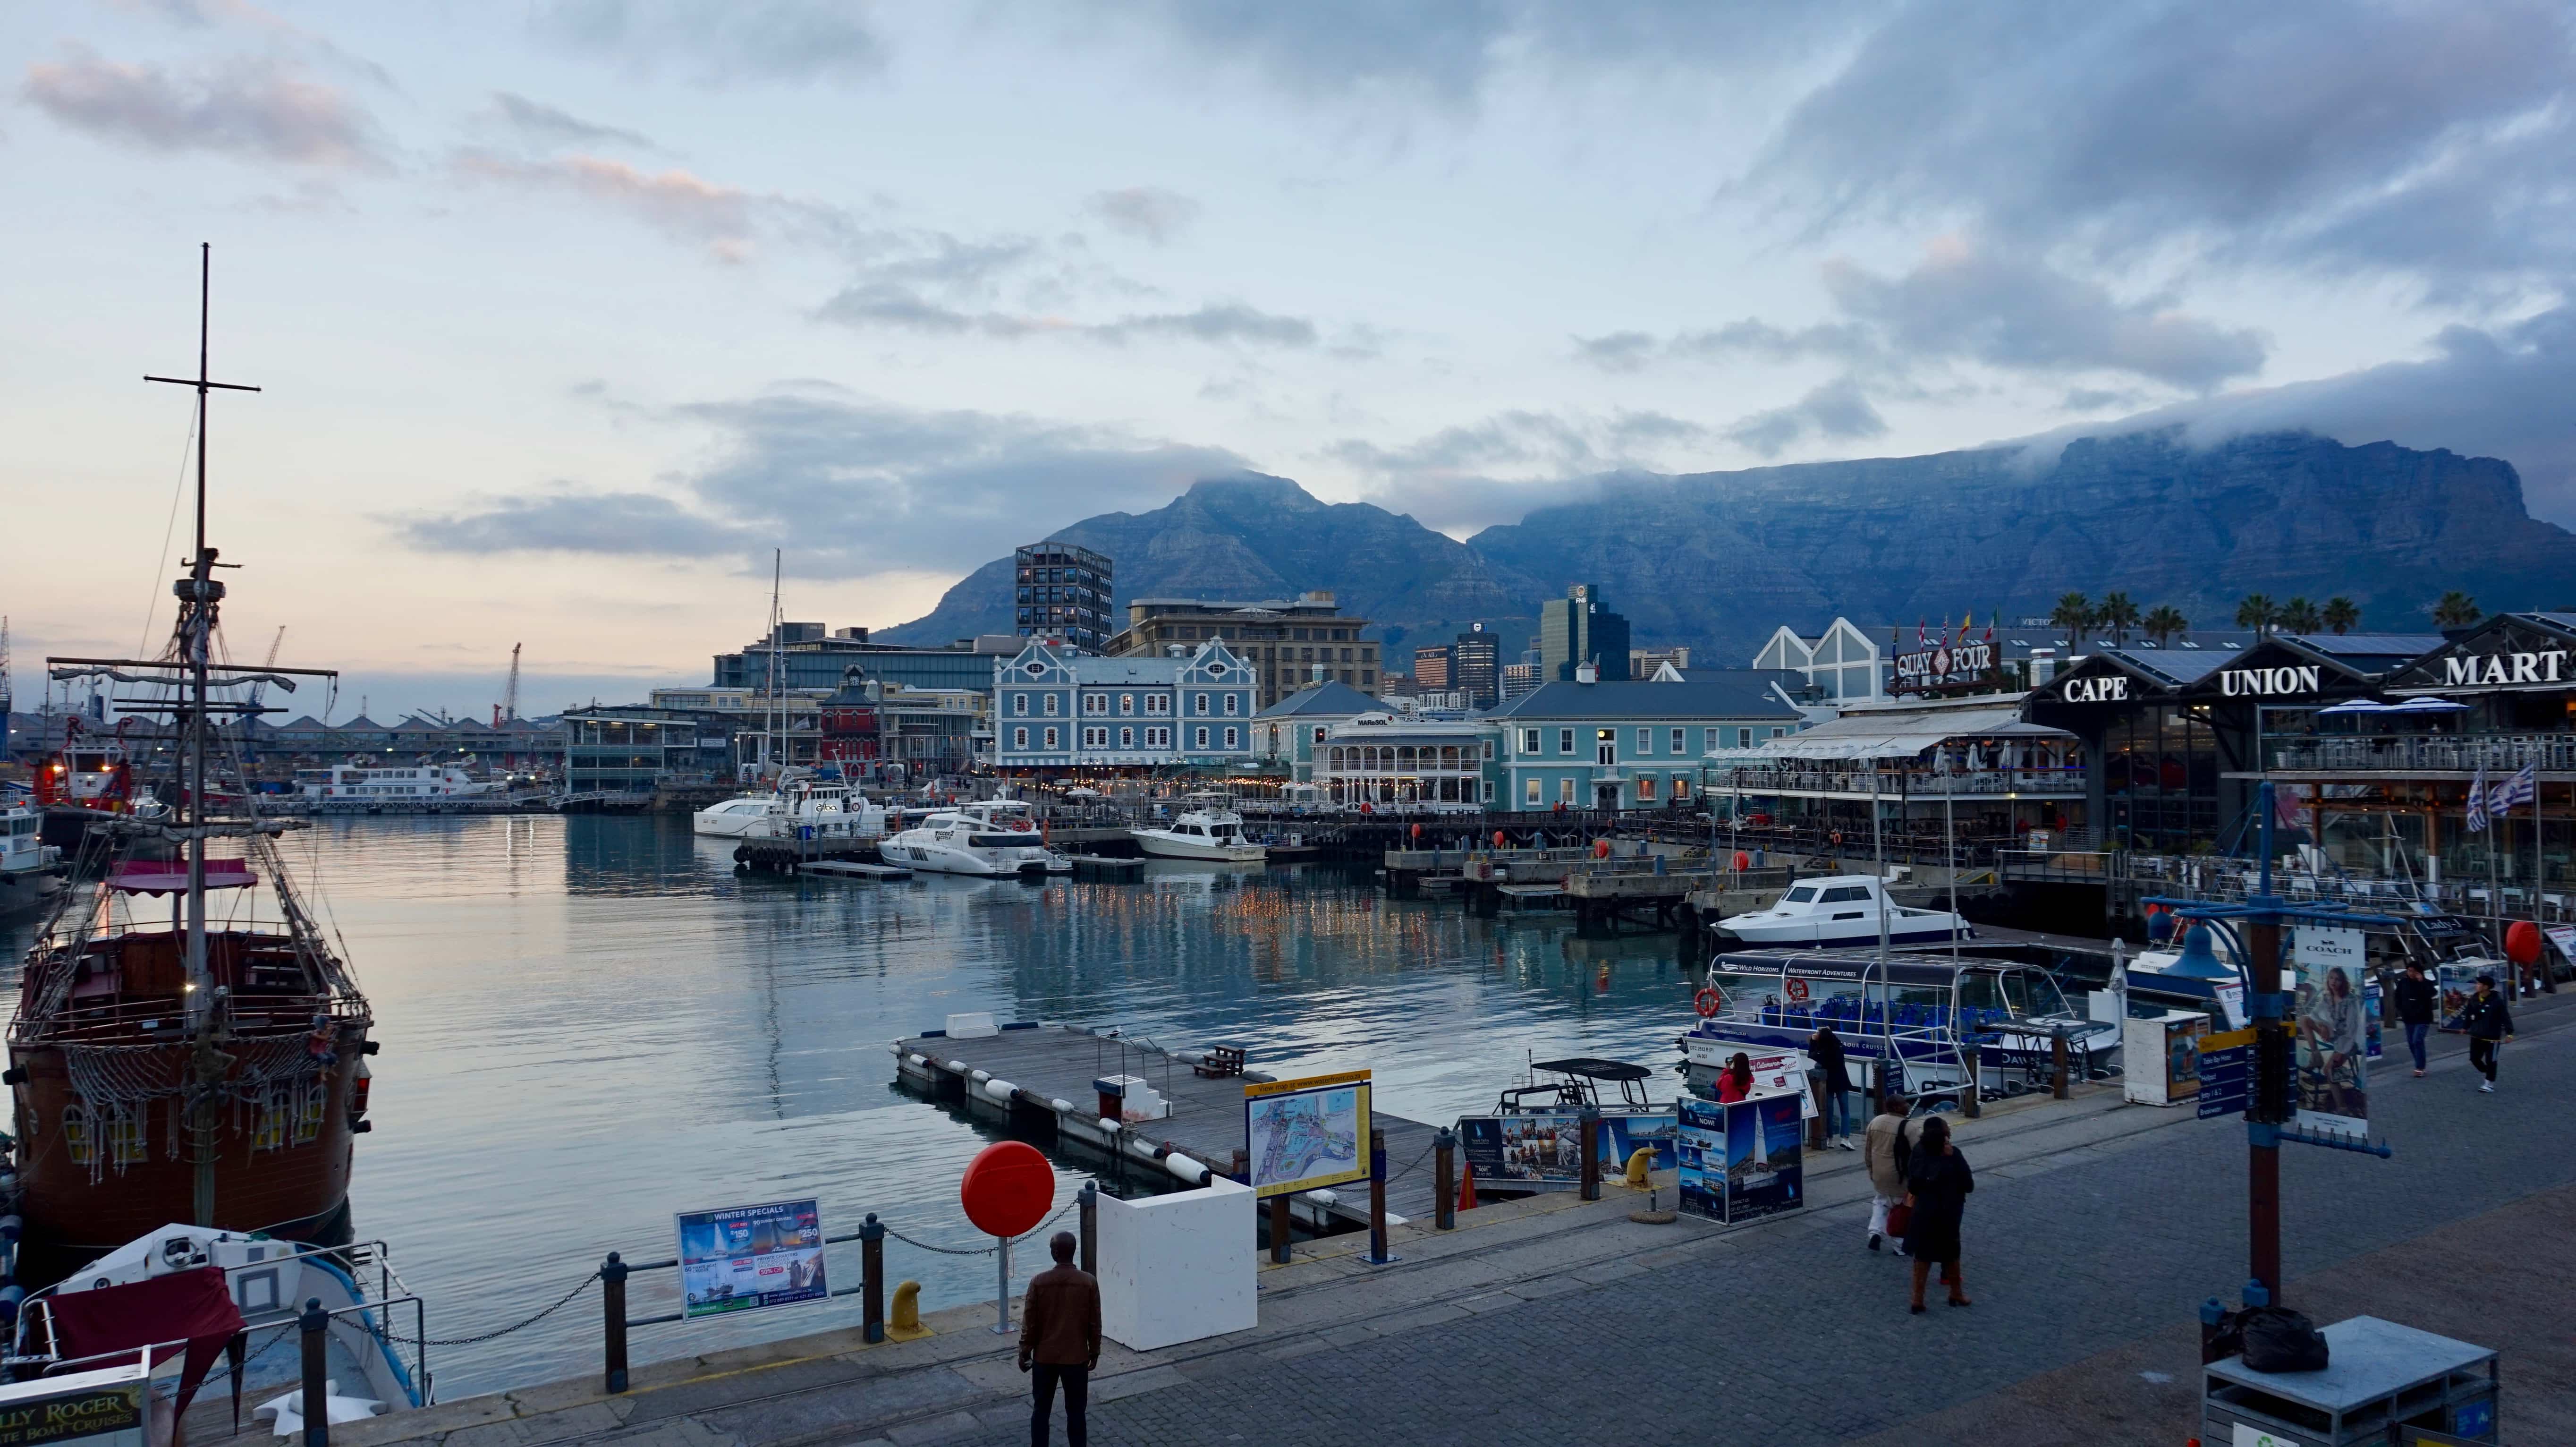 The Victoria and Alfred waterfront in Cape Town